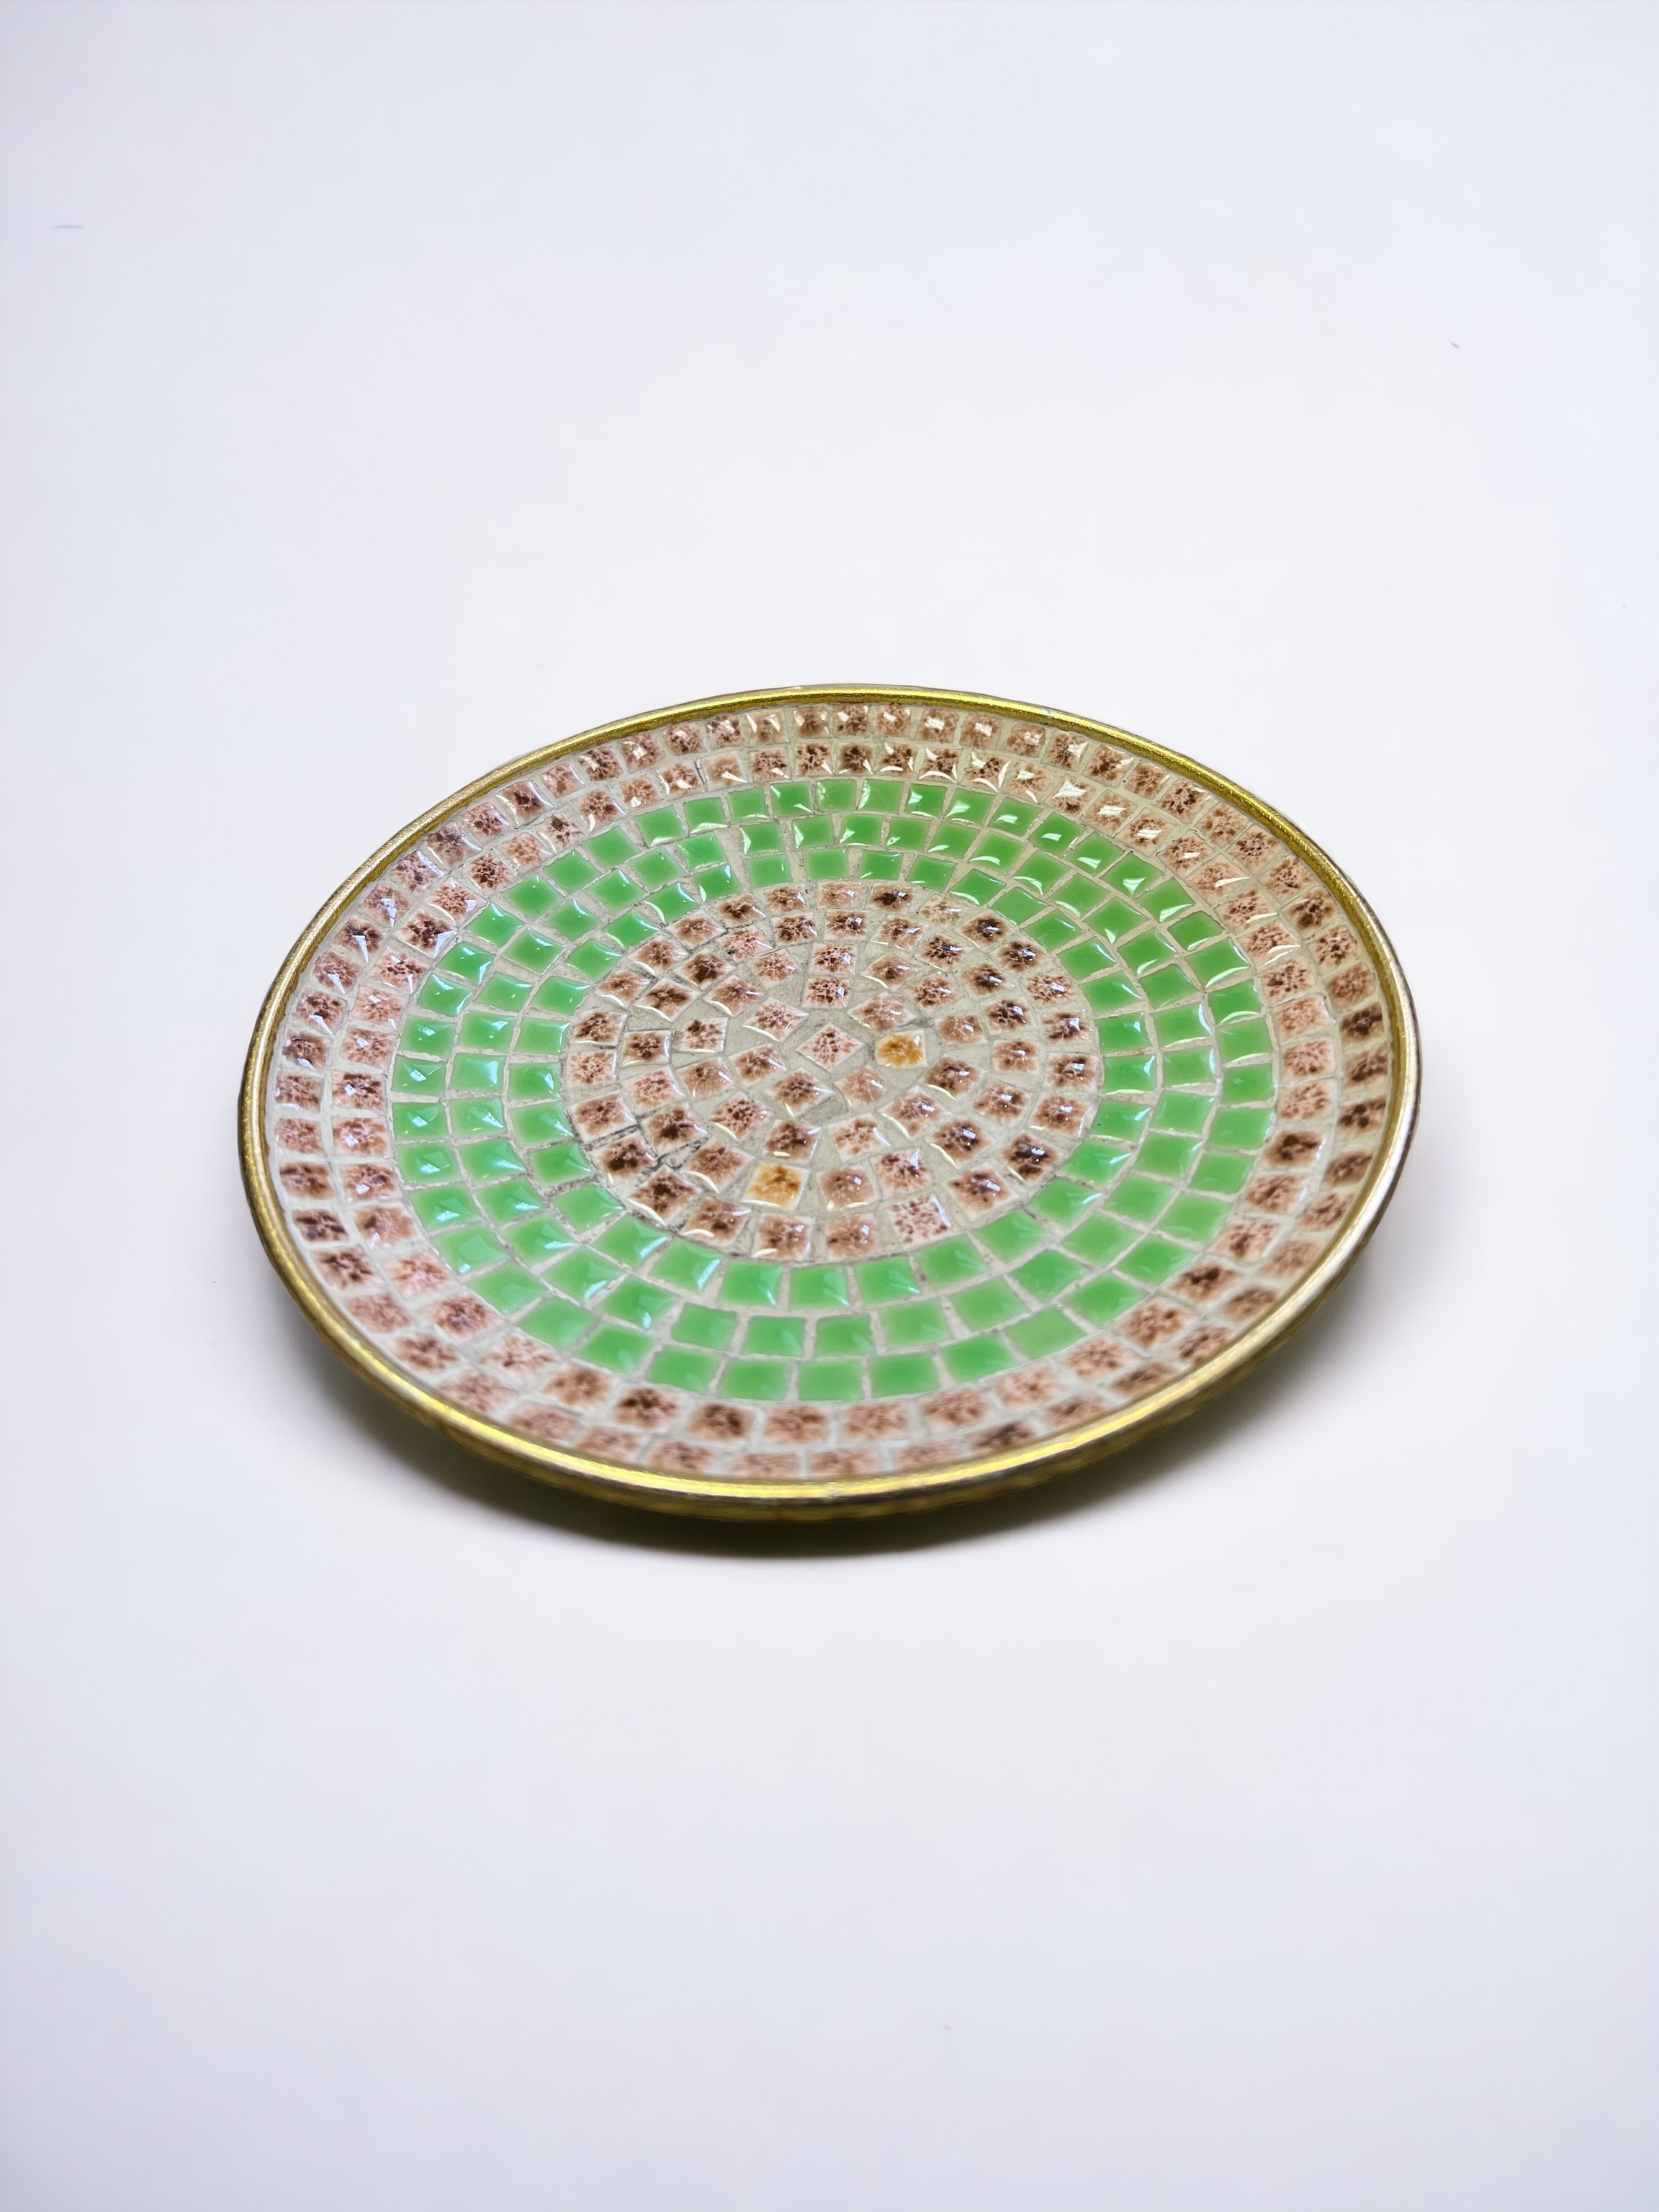 Green And Cream Mosaic Tile Plate